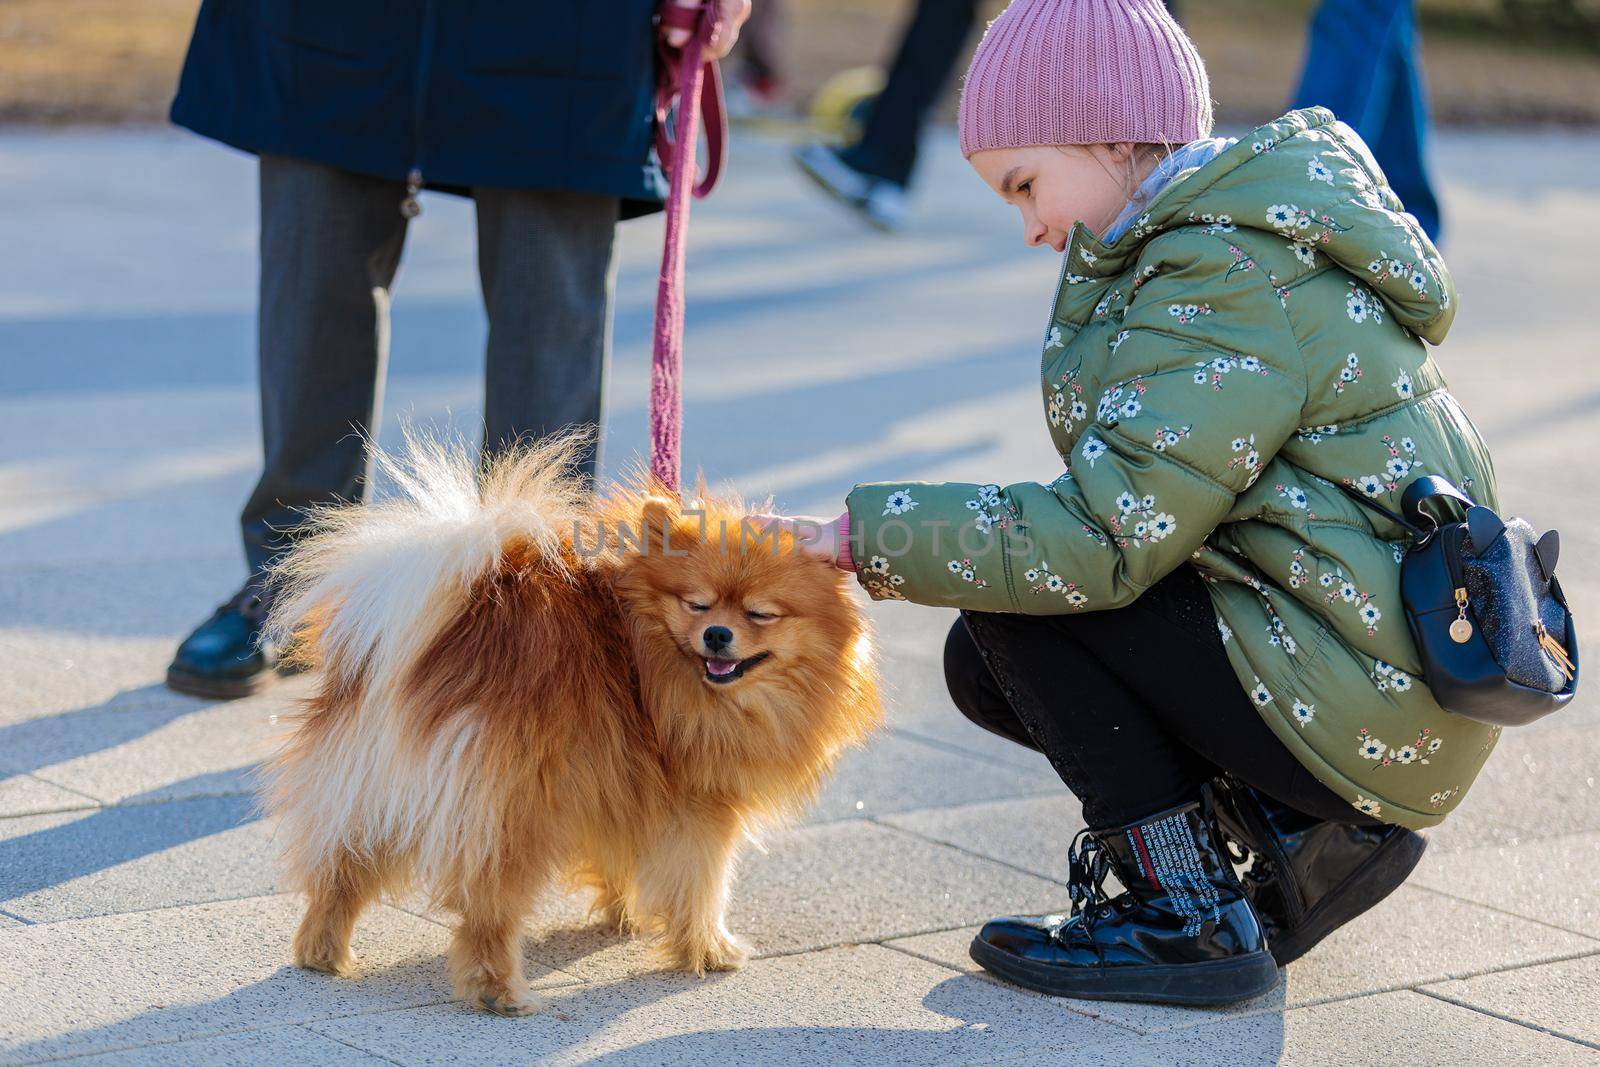 The girl strokes the little dog on a leash in the park. Caresses the dog and rejoices. Russia Zelenograd April 23, 2022.